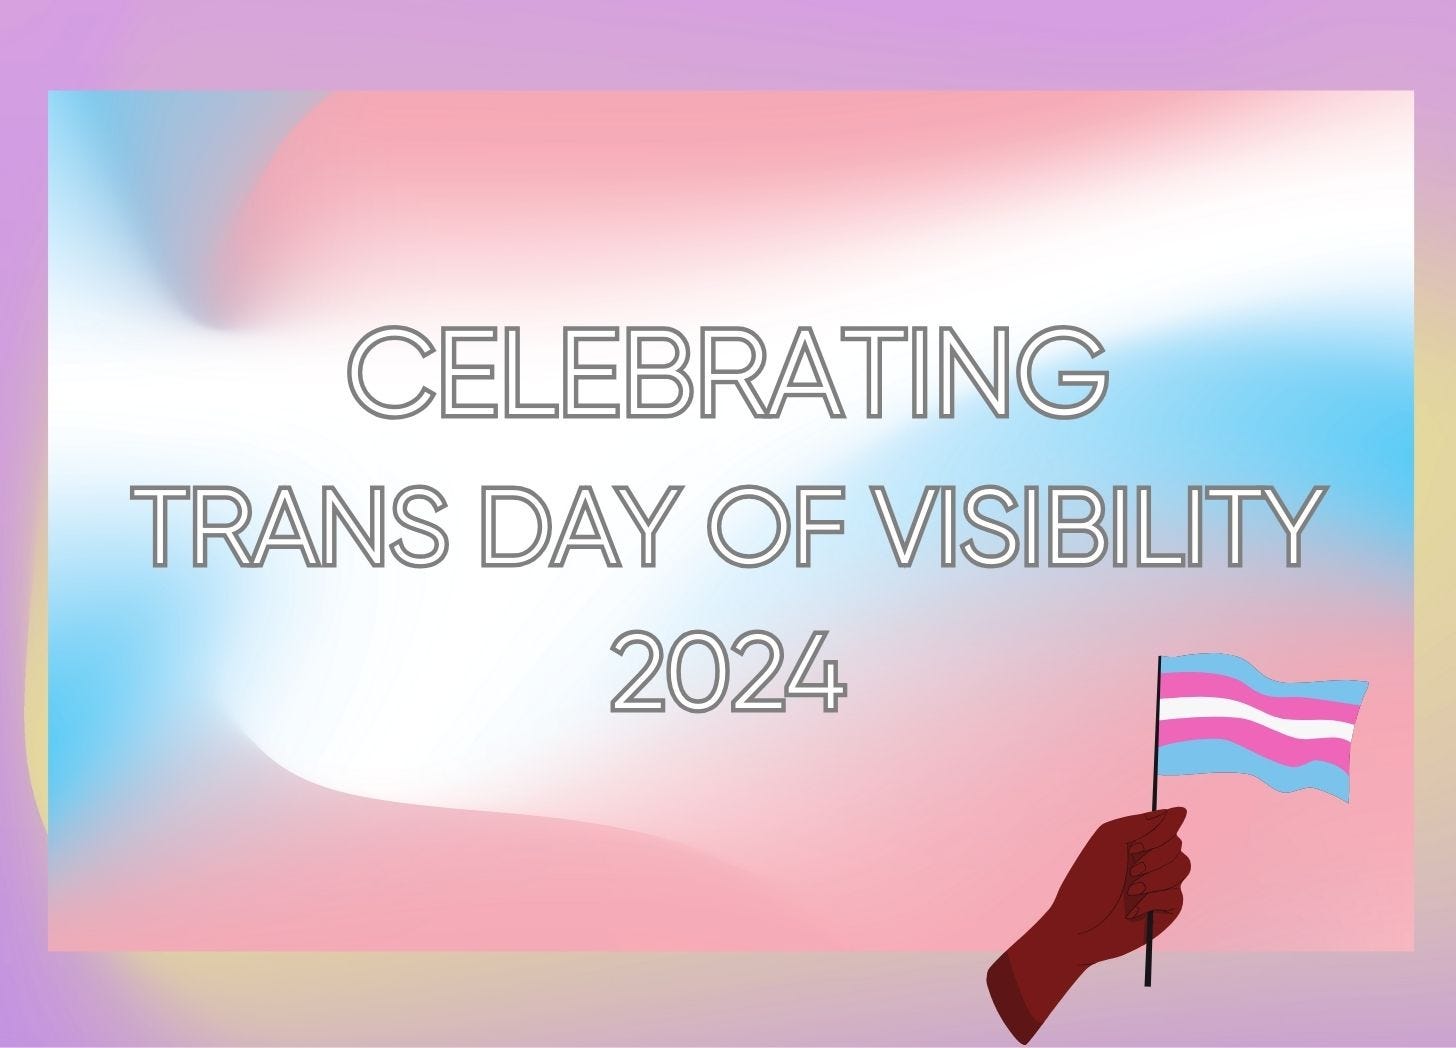 Trans Day of Visibility offers chance for community to stand in